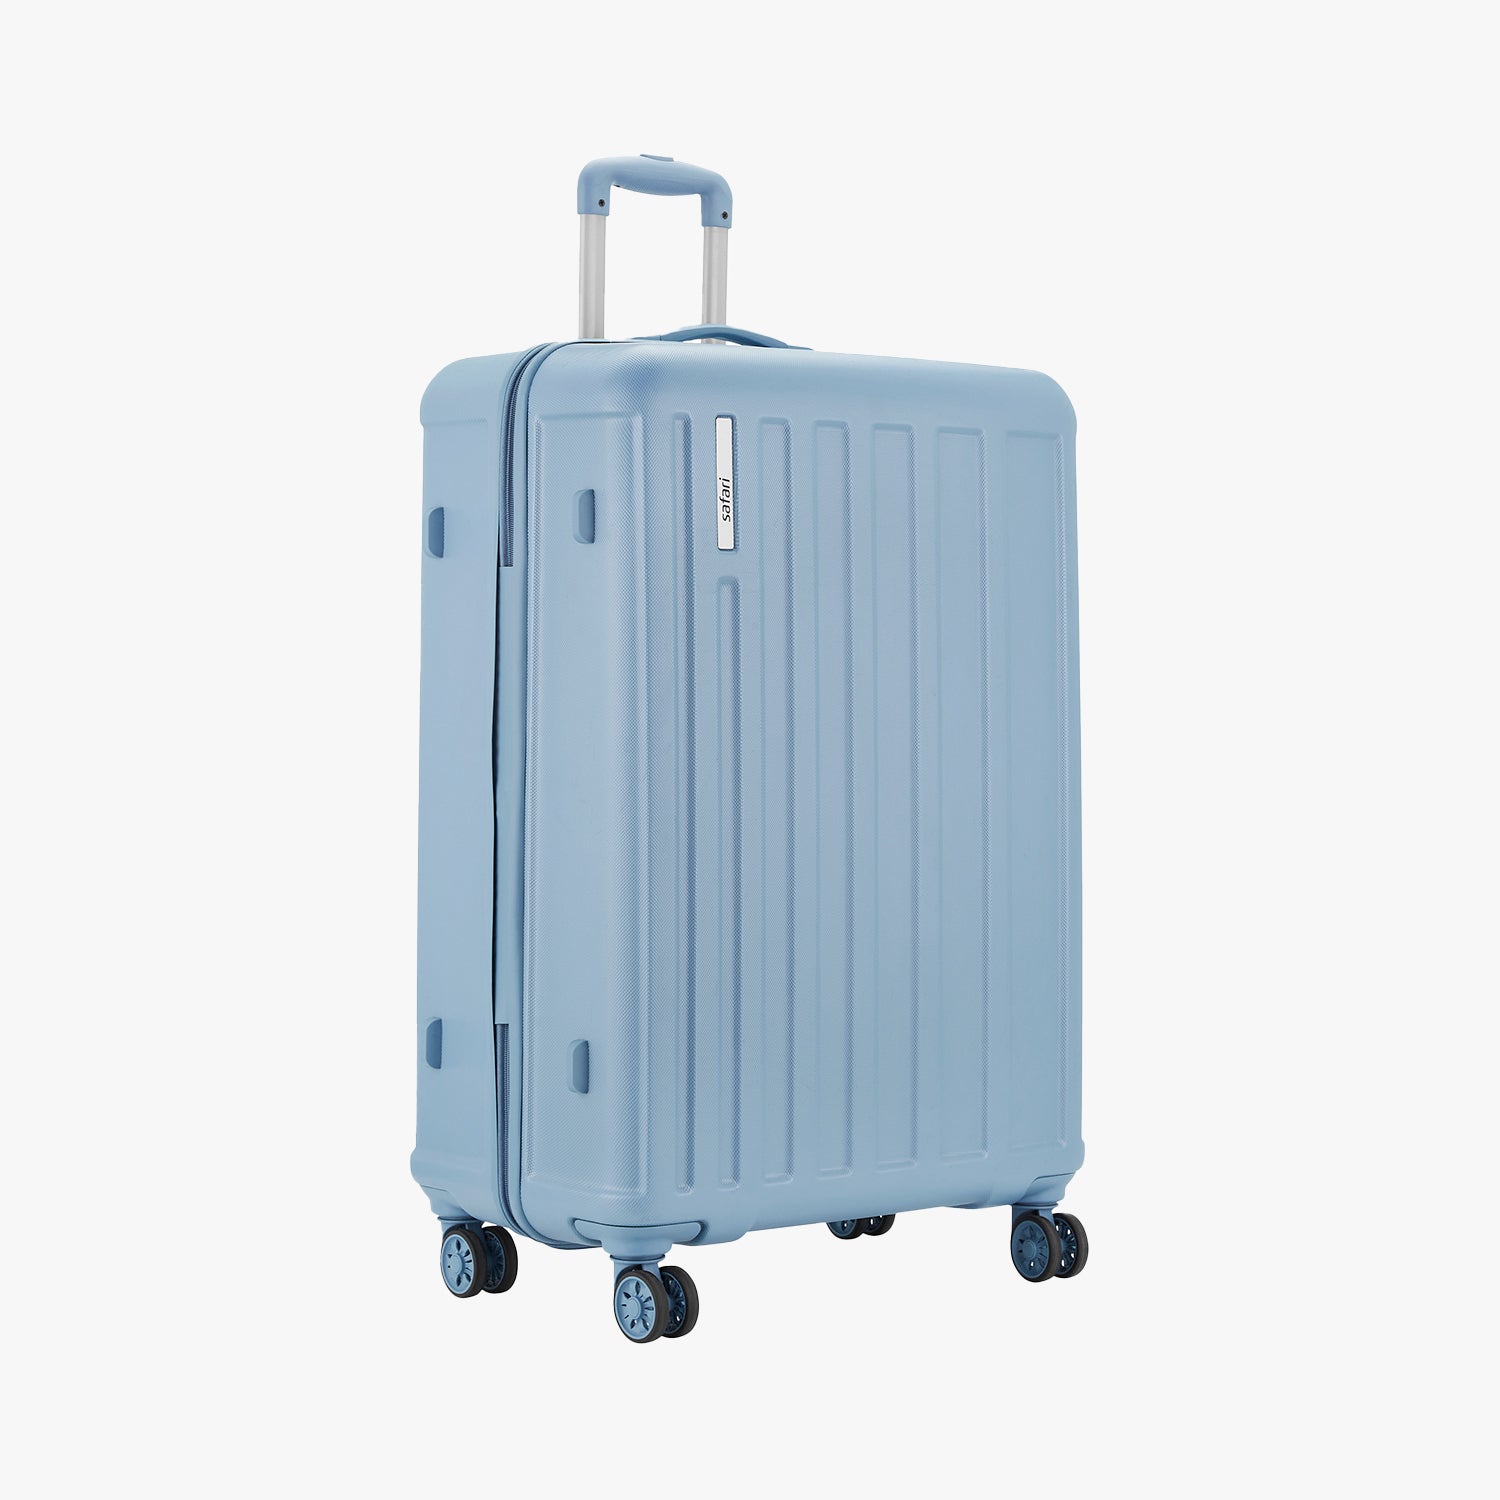 Linea Hard Luggage With Dual Wheels and Detailed Interiors Combo (Small, Medium and Large) - Pearl Blue